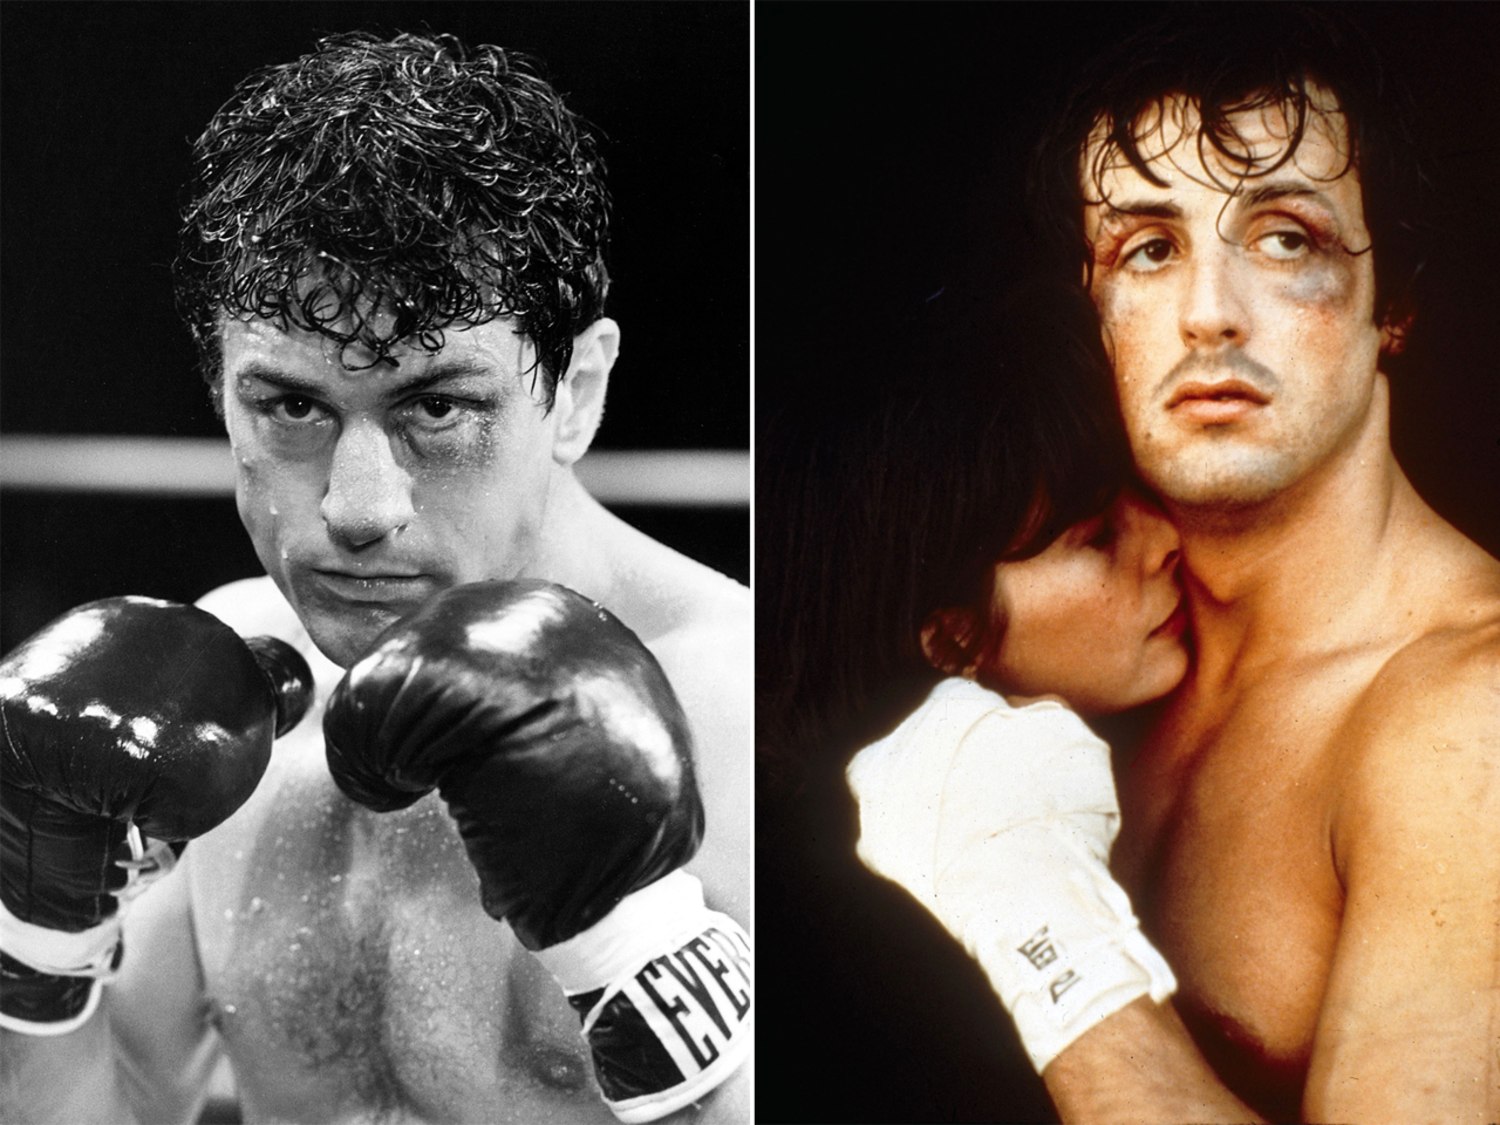 Robert De Niro training to fight Sylvester Stallone in new boxing film